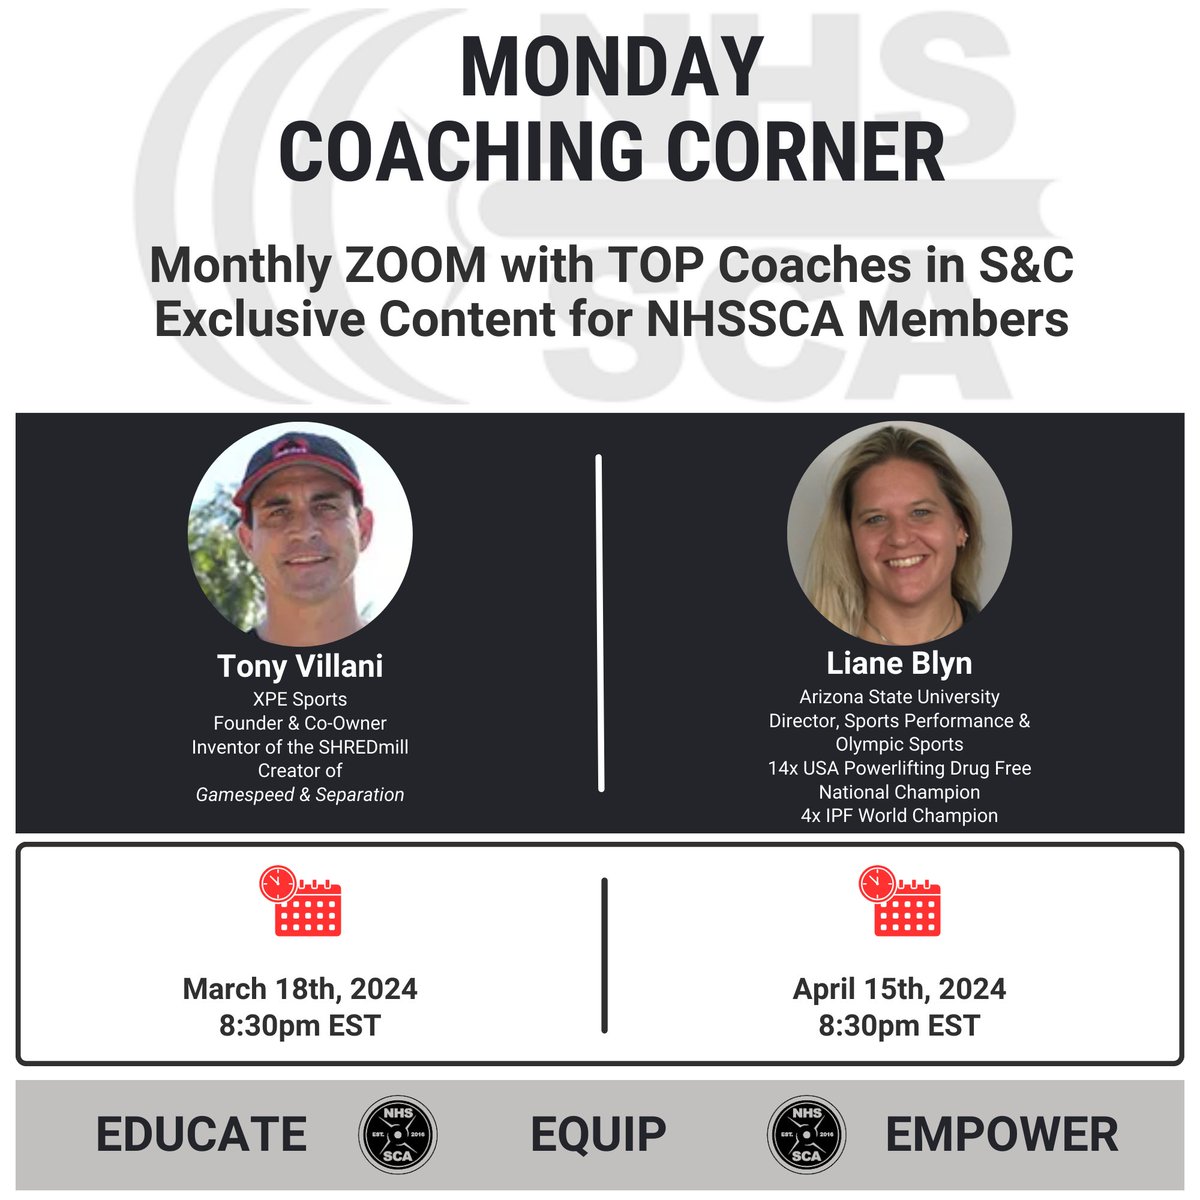 We have 2 great Monday Coaching Corners upcoming for our Professional Members! We're thrilled to have Tony Villani @Tony_Villani one week from tonight! Next month, Liane Blynn @lianeblyn will be with us! Don't miss these great upcoming educational opportunities!